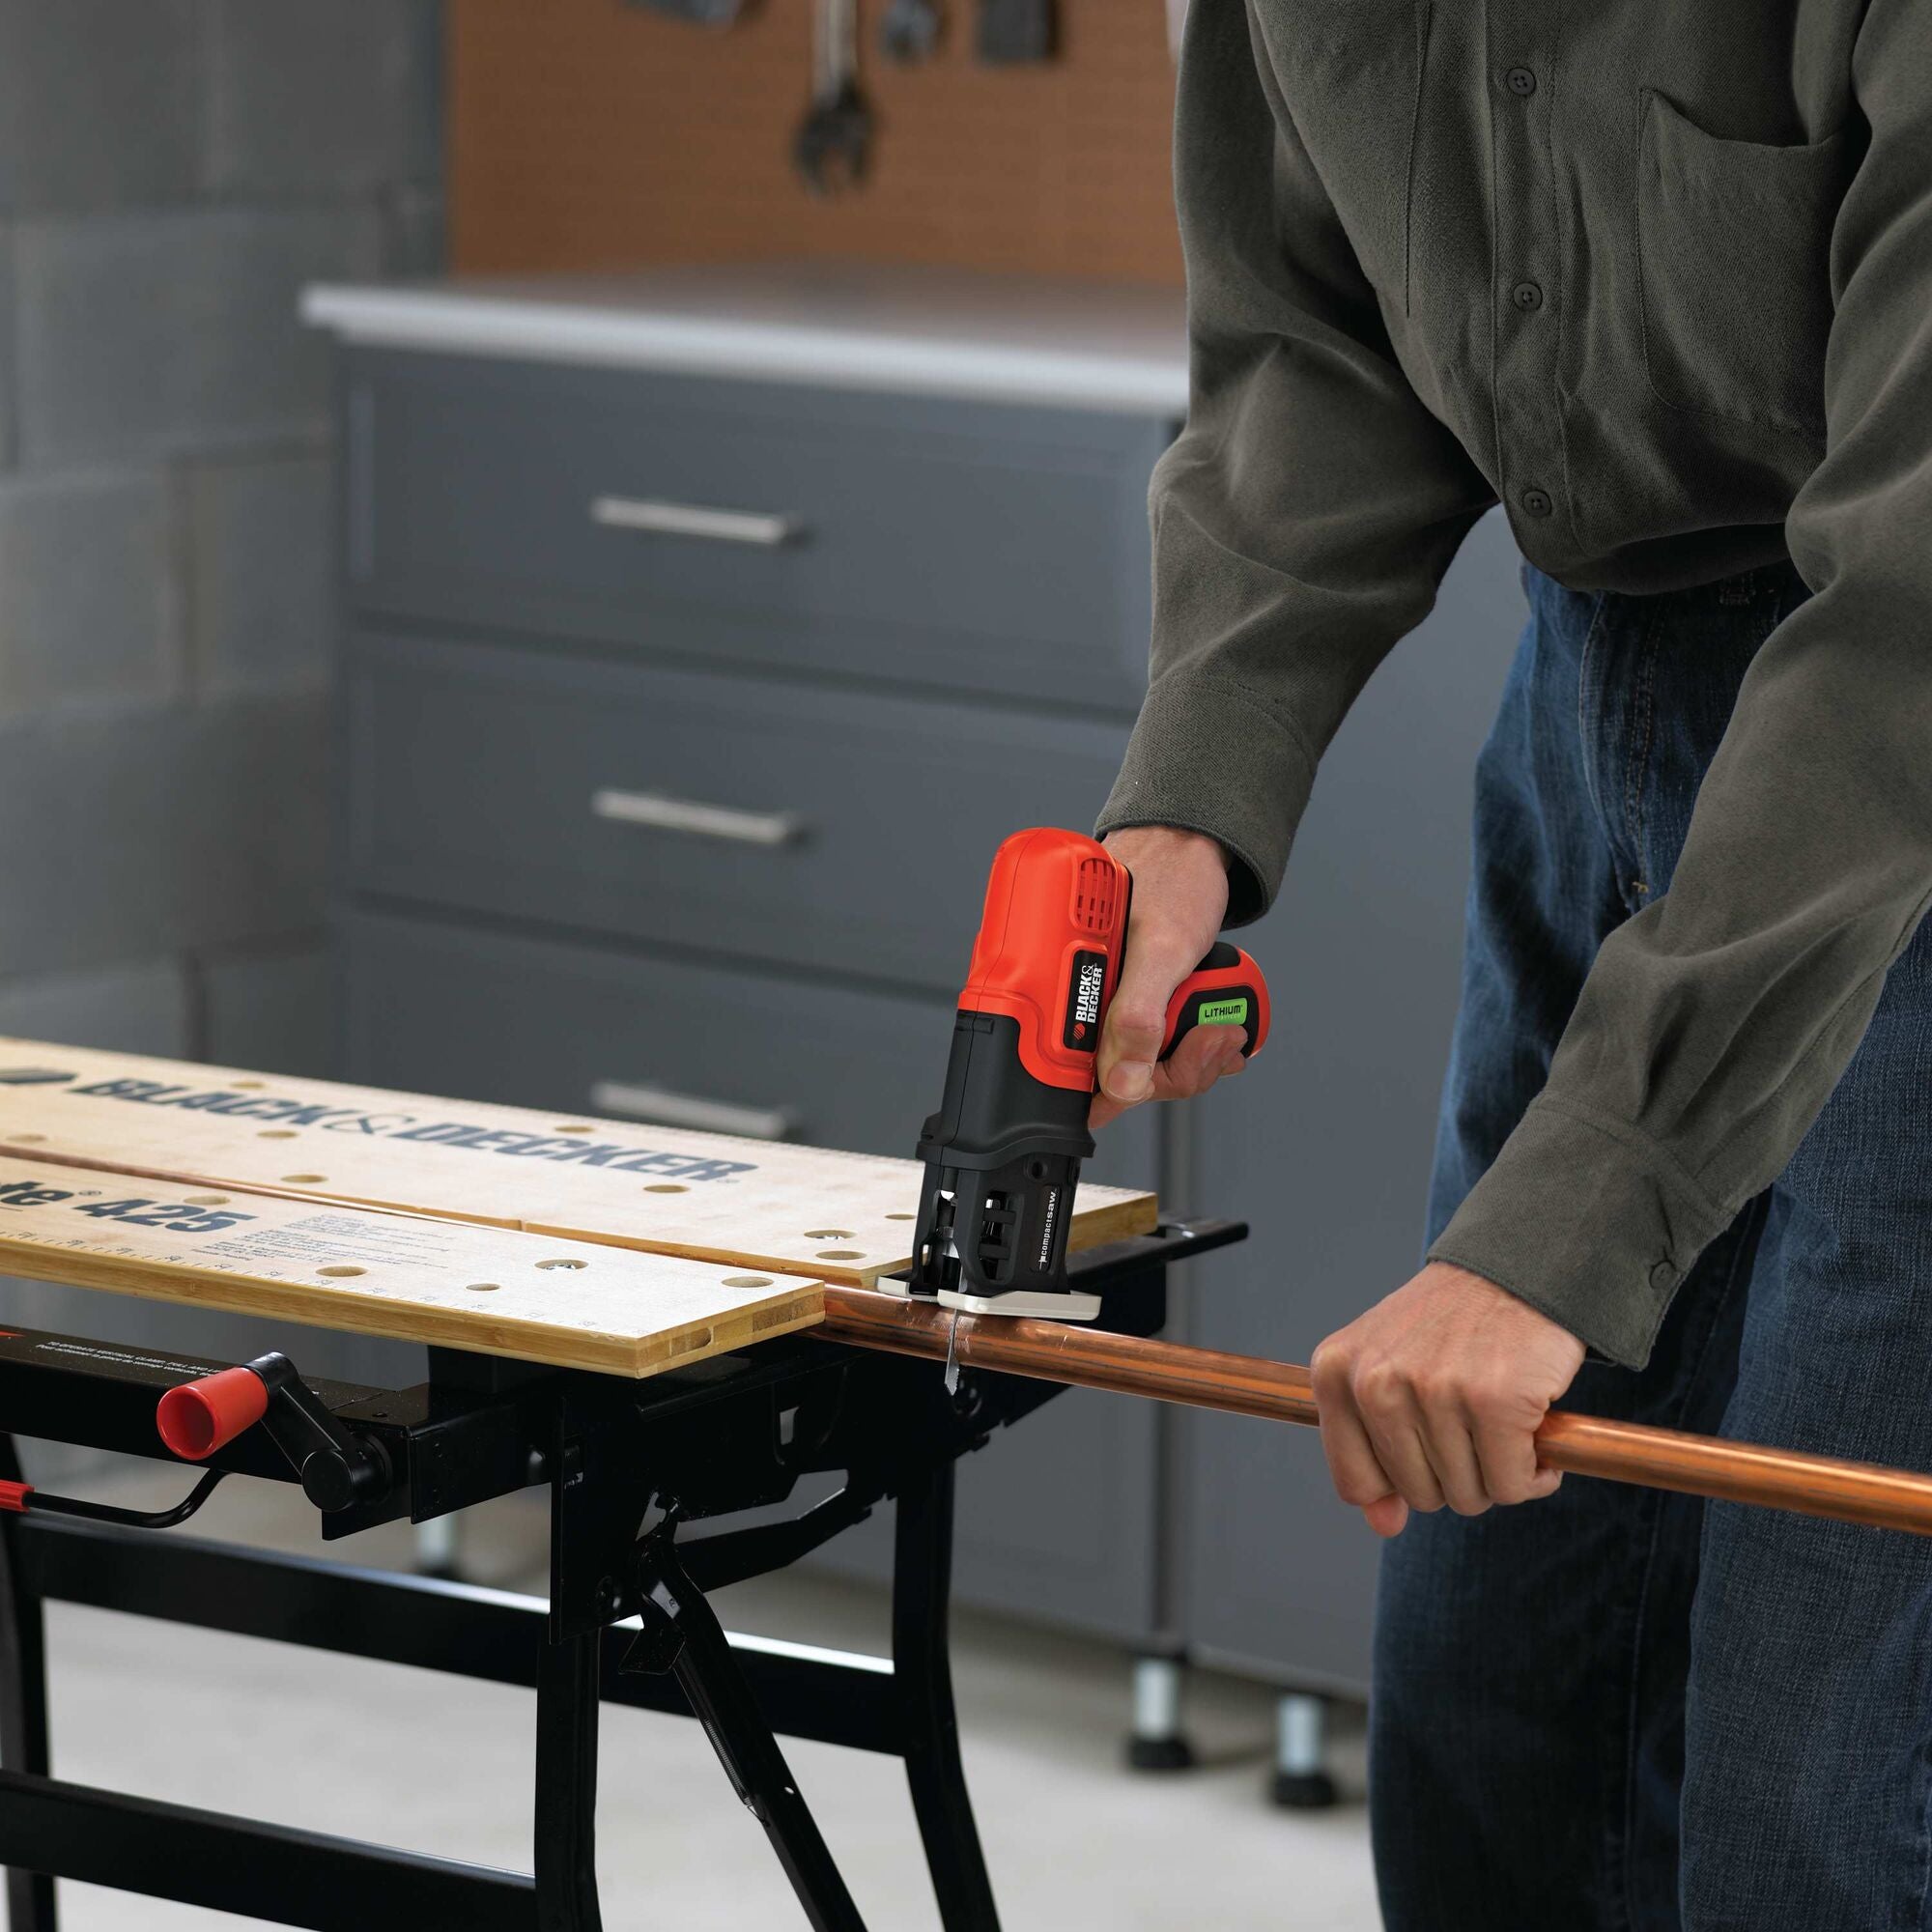 Jig Saw, Cordless, Compact is being used to cut wood
